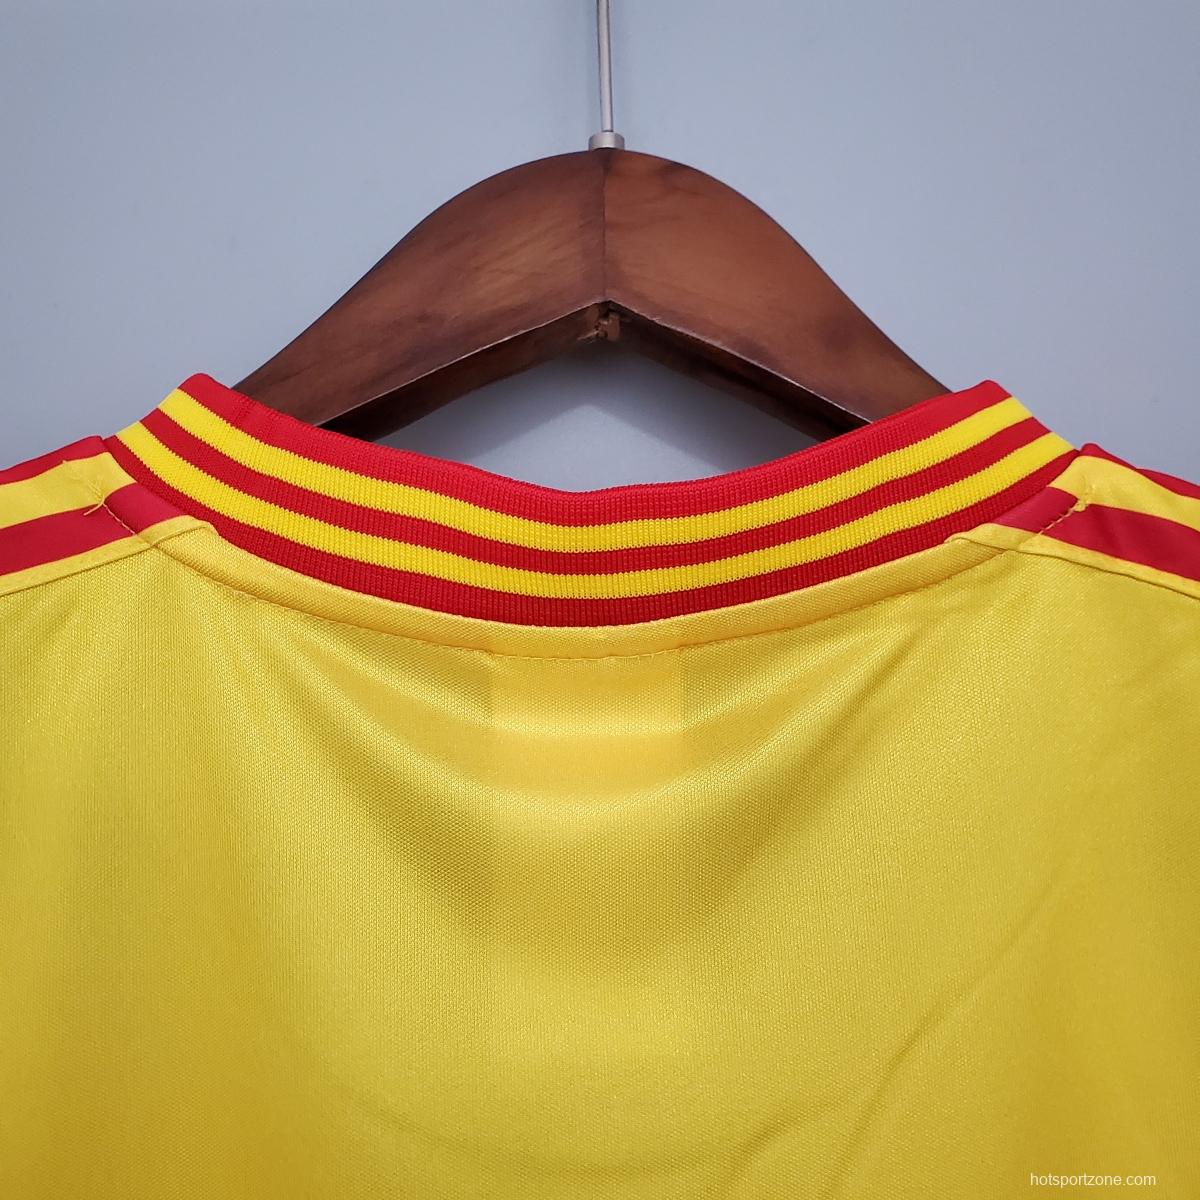 Retro Colombia 1990 home Soccer Jersey